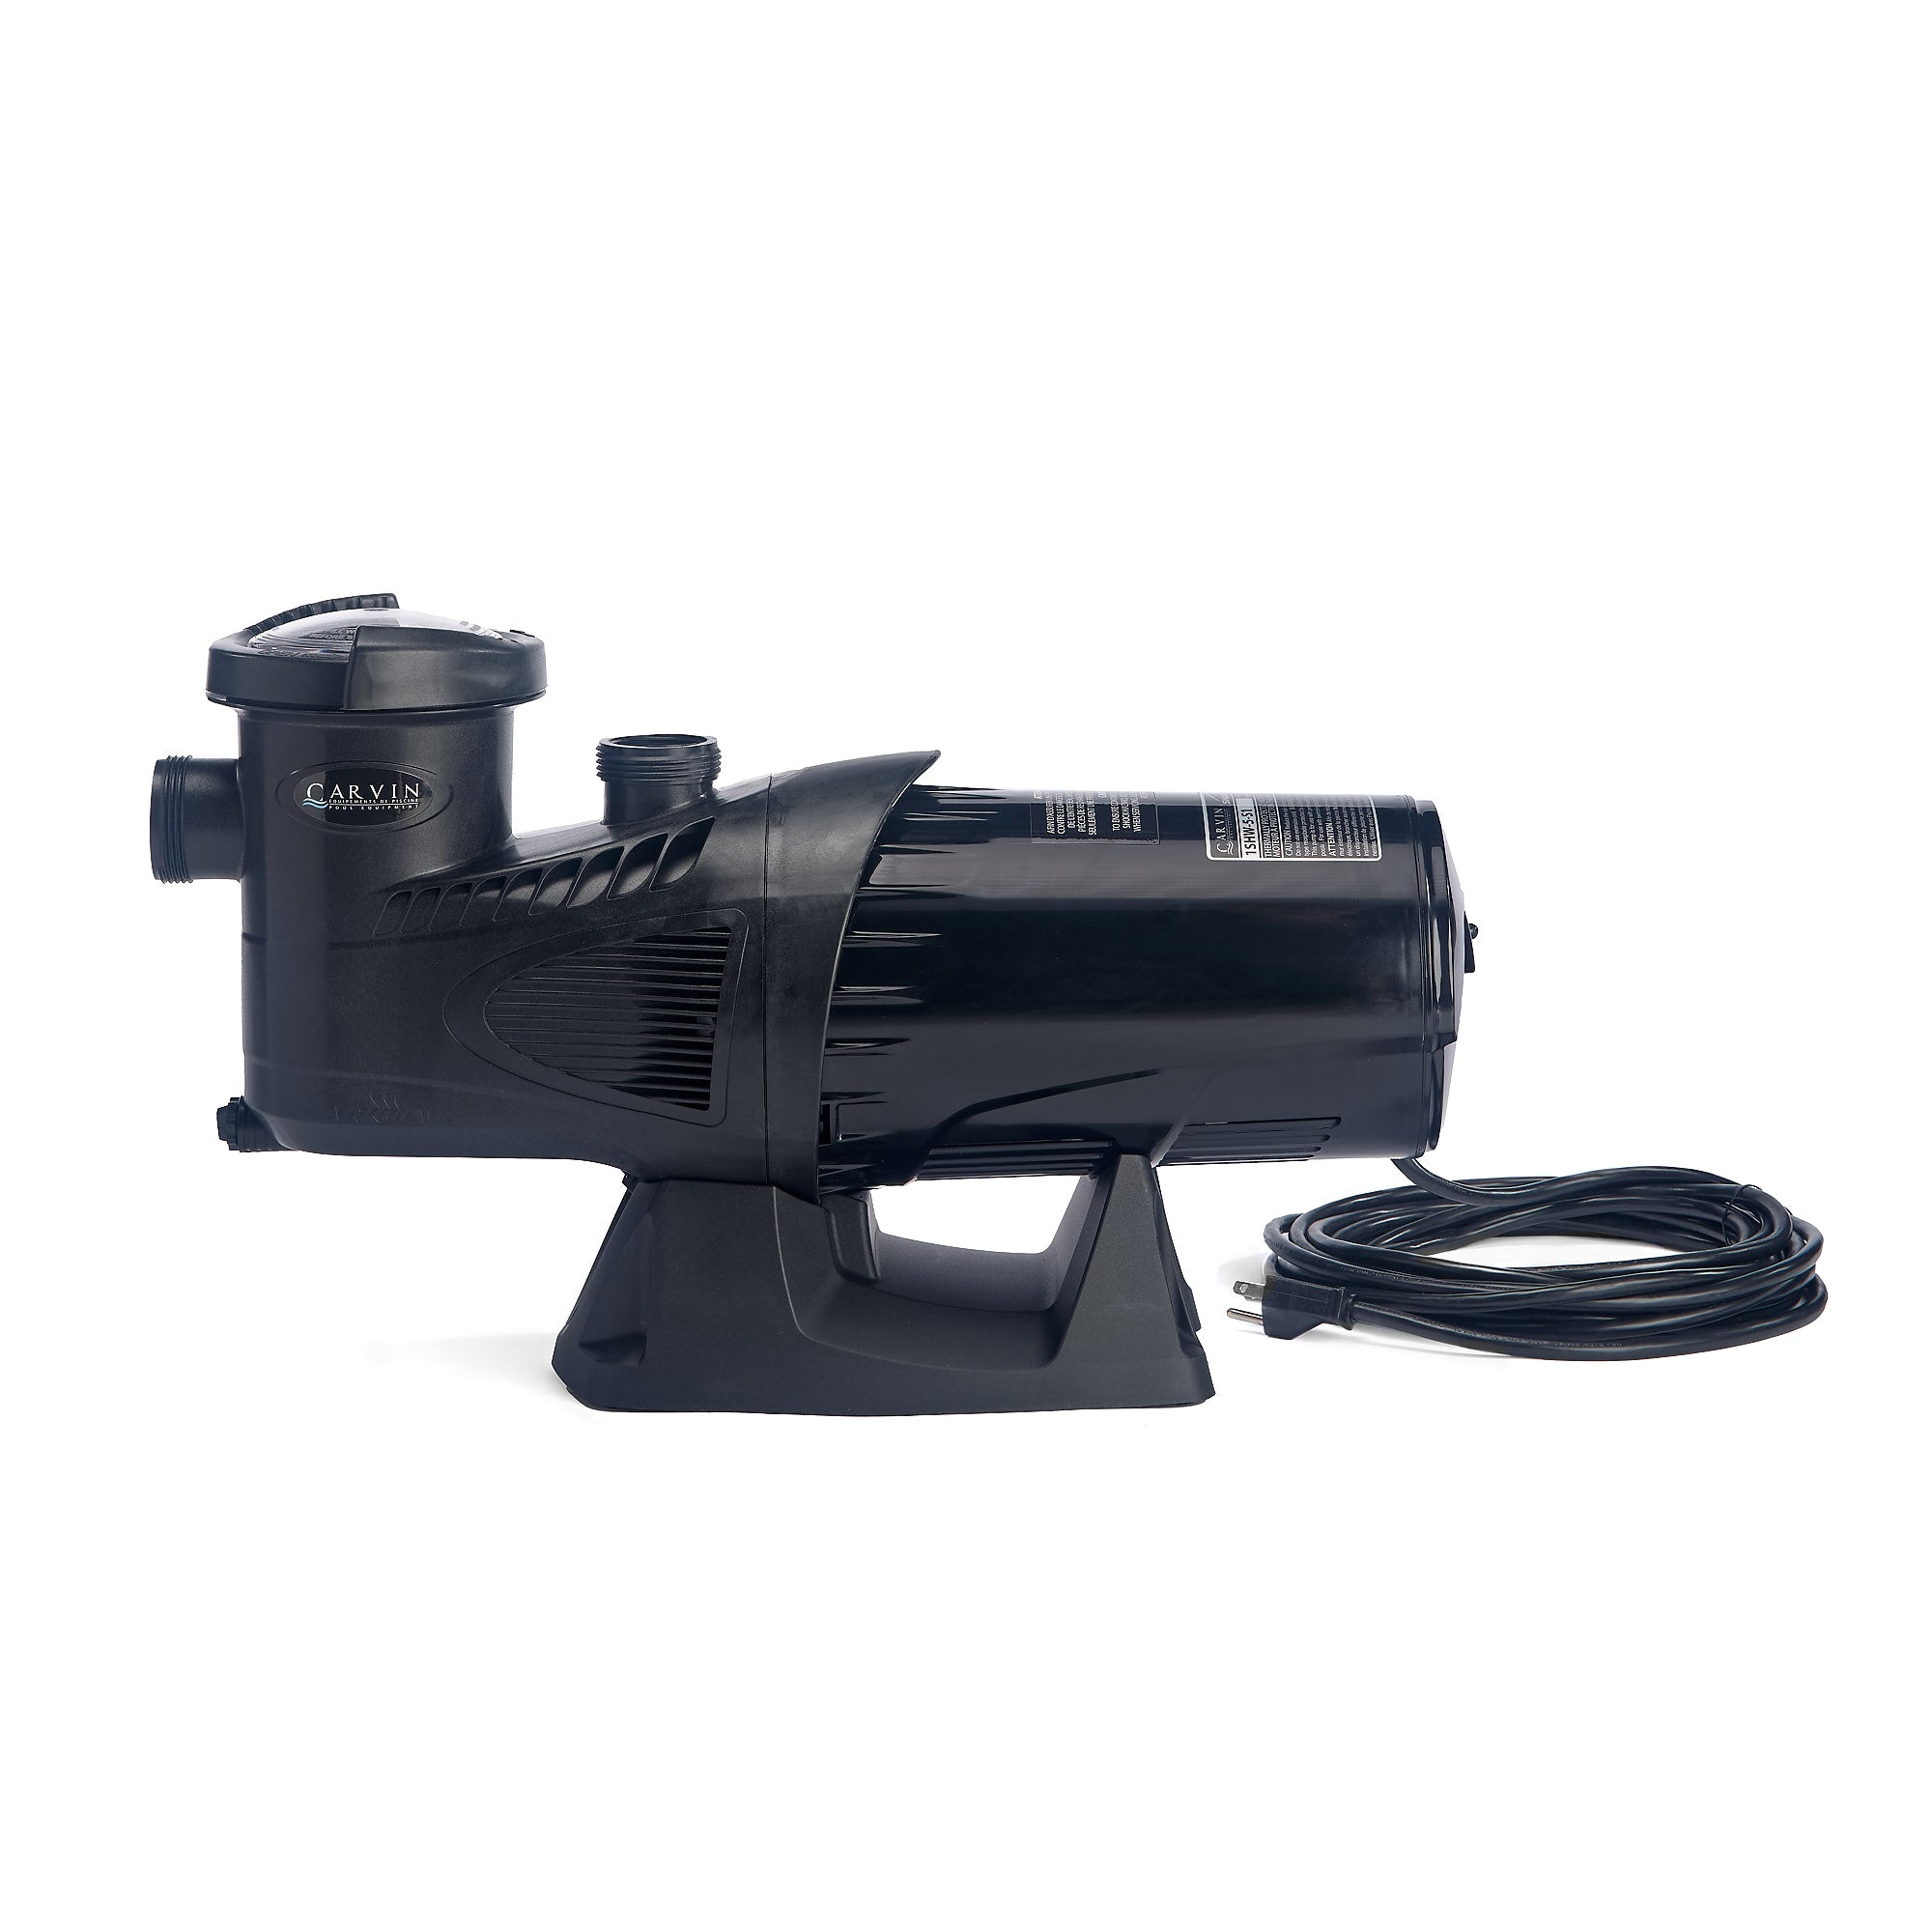 Carvin Sharkwave Pump for Above-Ground Pools